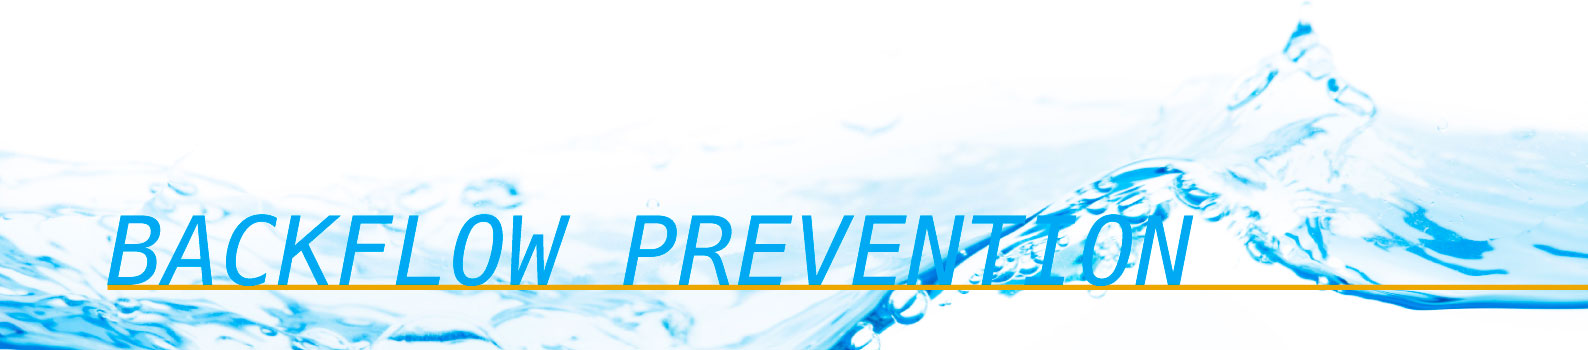 Backflow Prevention Experts